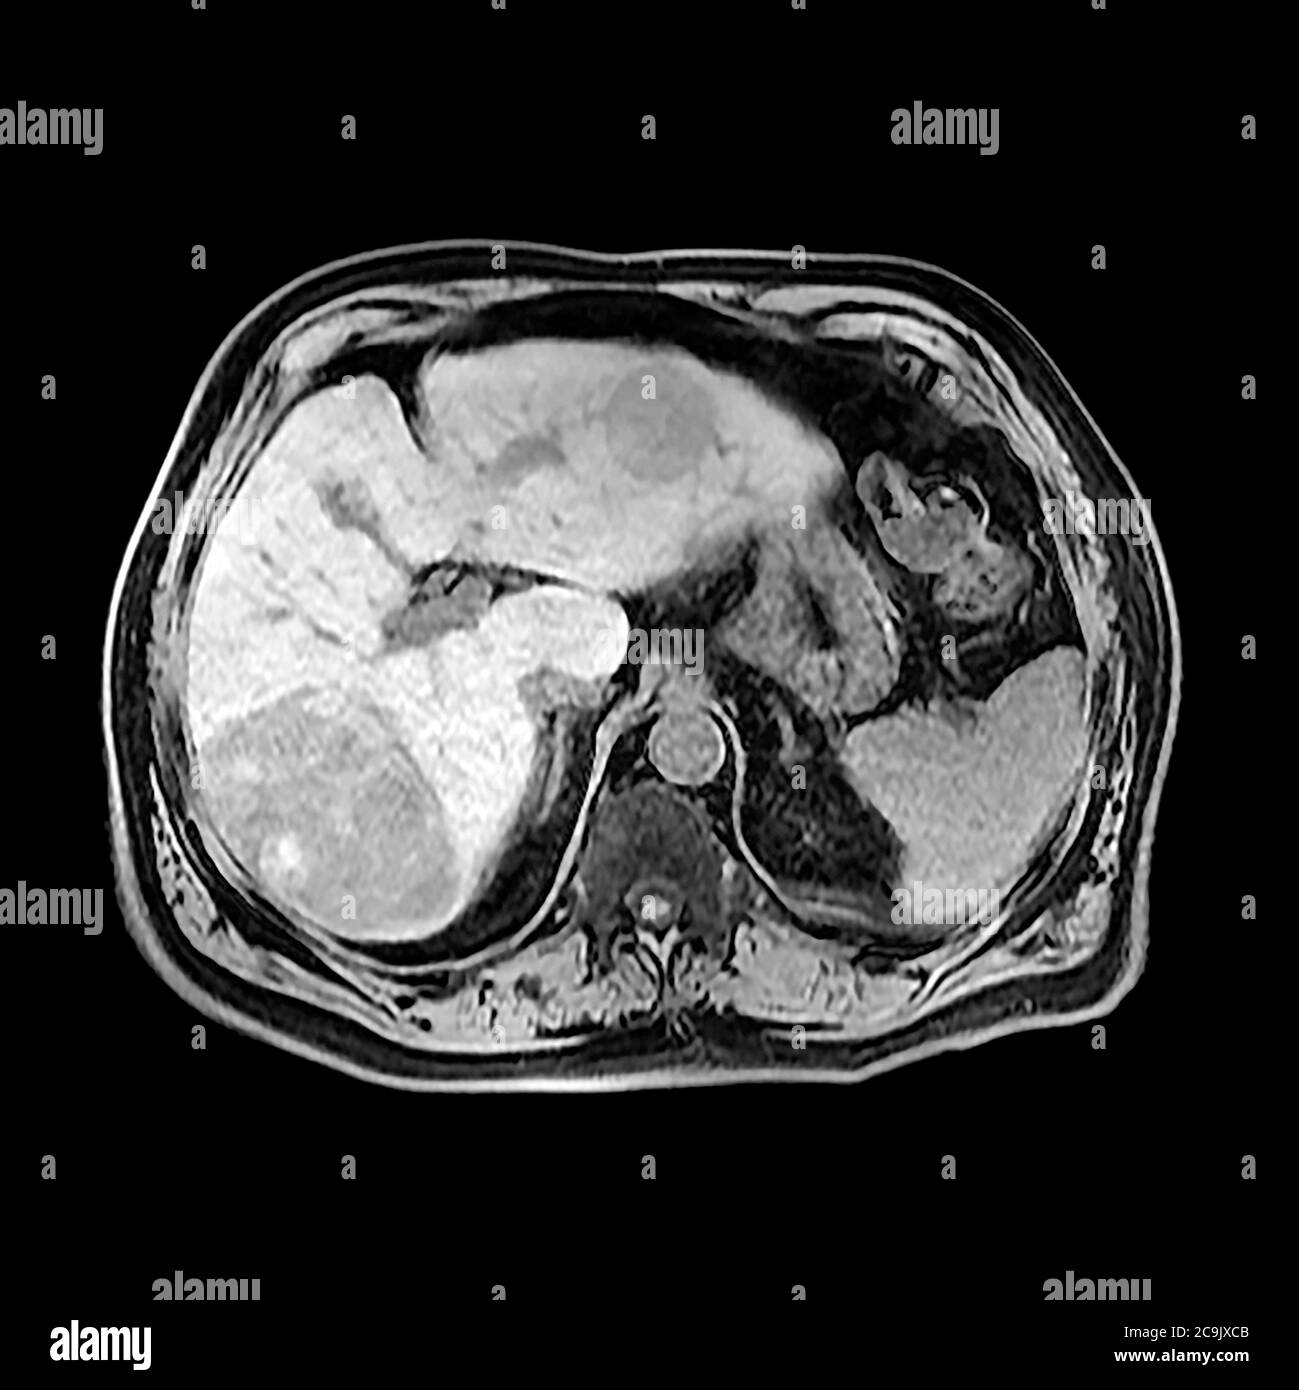 Liver cancer. Axial computed tomography (CT) scan through the abdomen of an 80-year-old man with cancer of the liver. The liver is at centre left. The Stock Photo